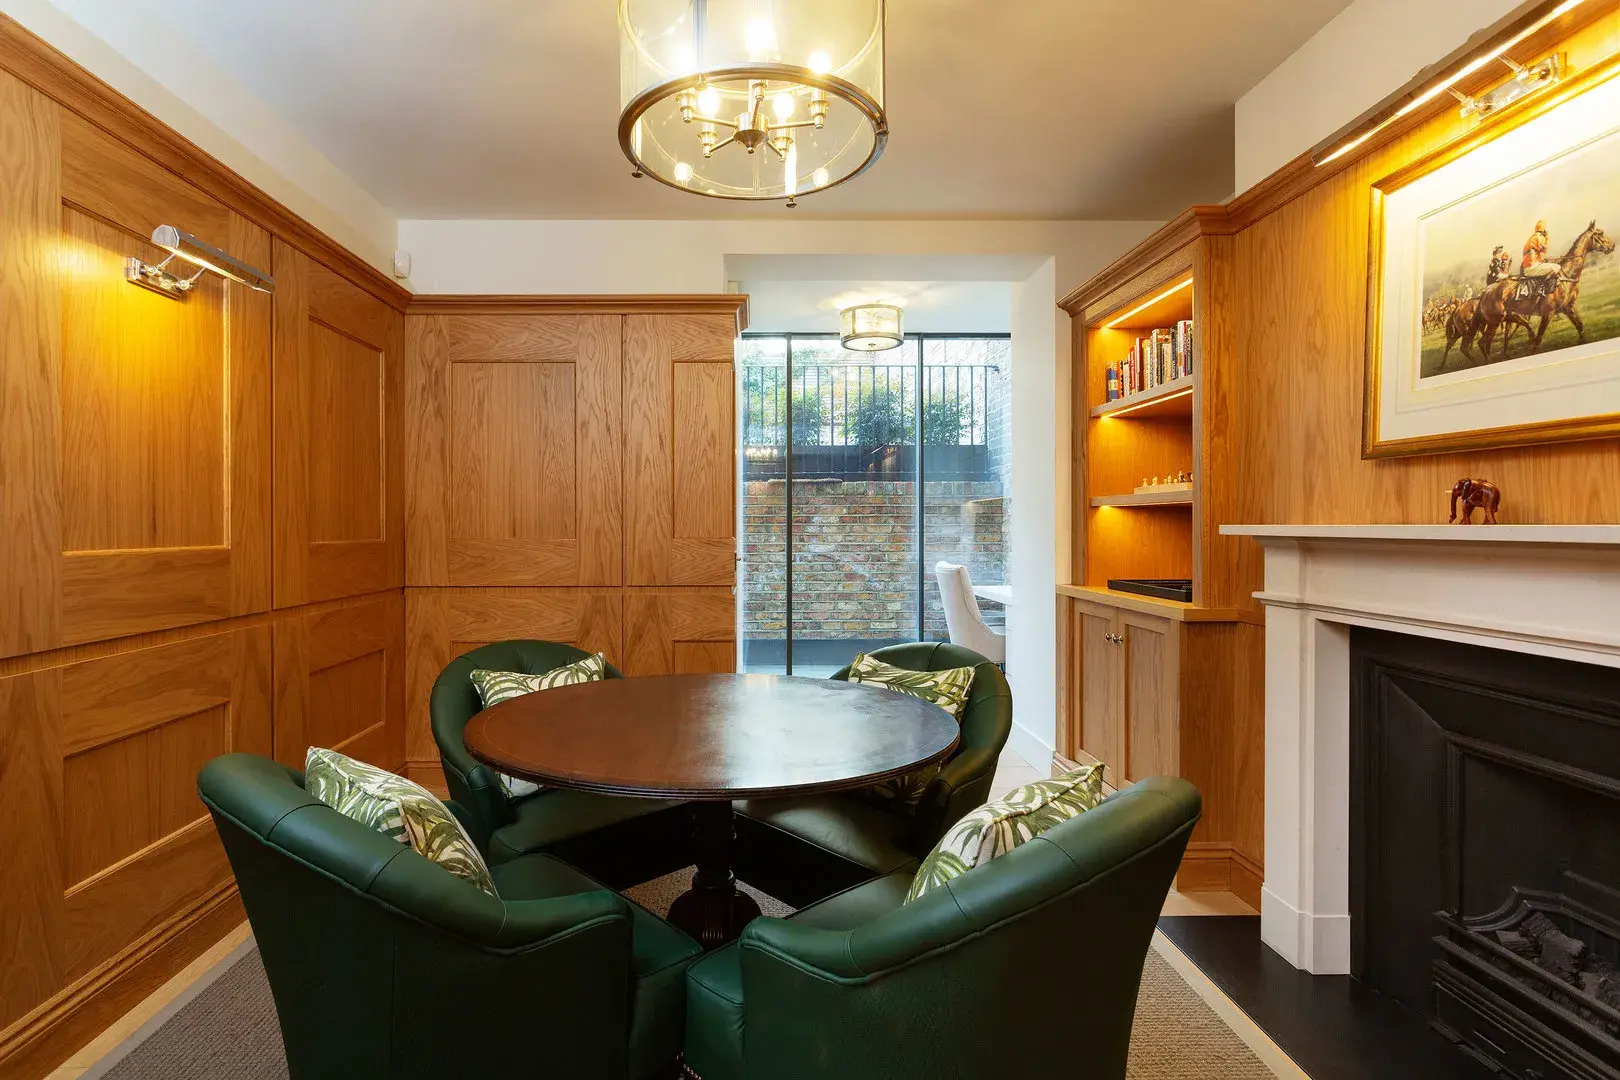 Neville Terrace, holiday home in South Kensington, London